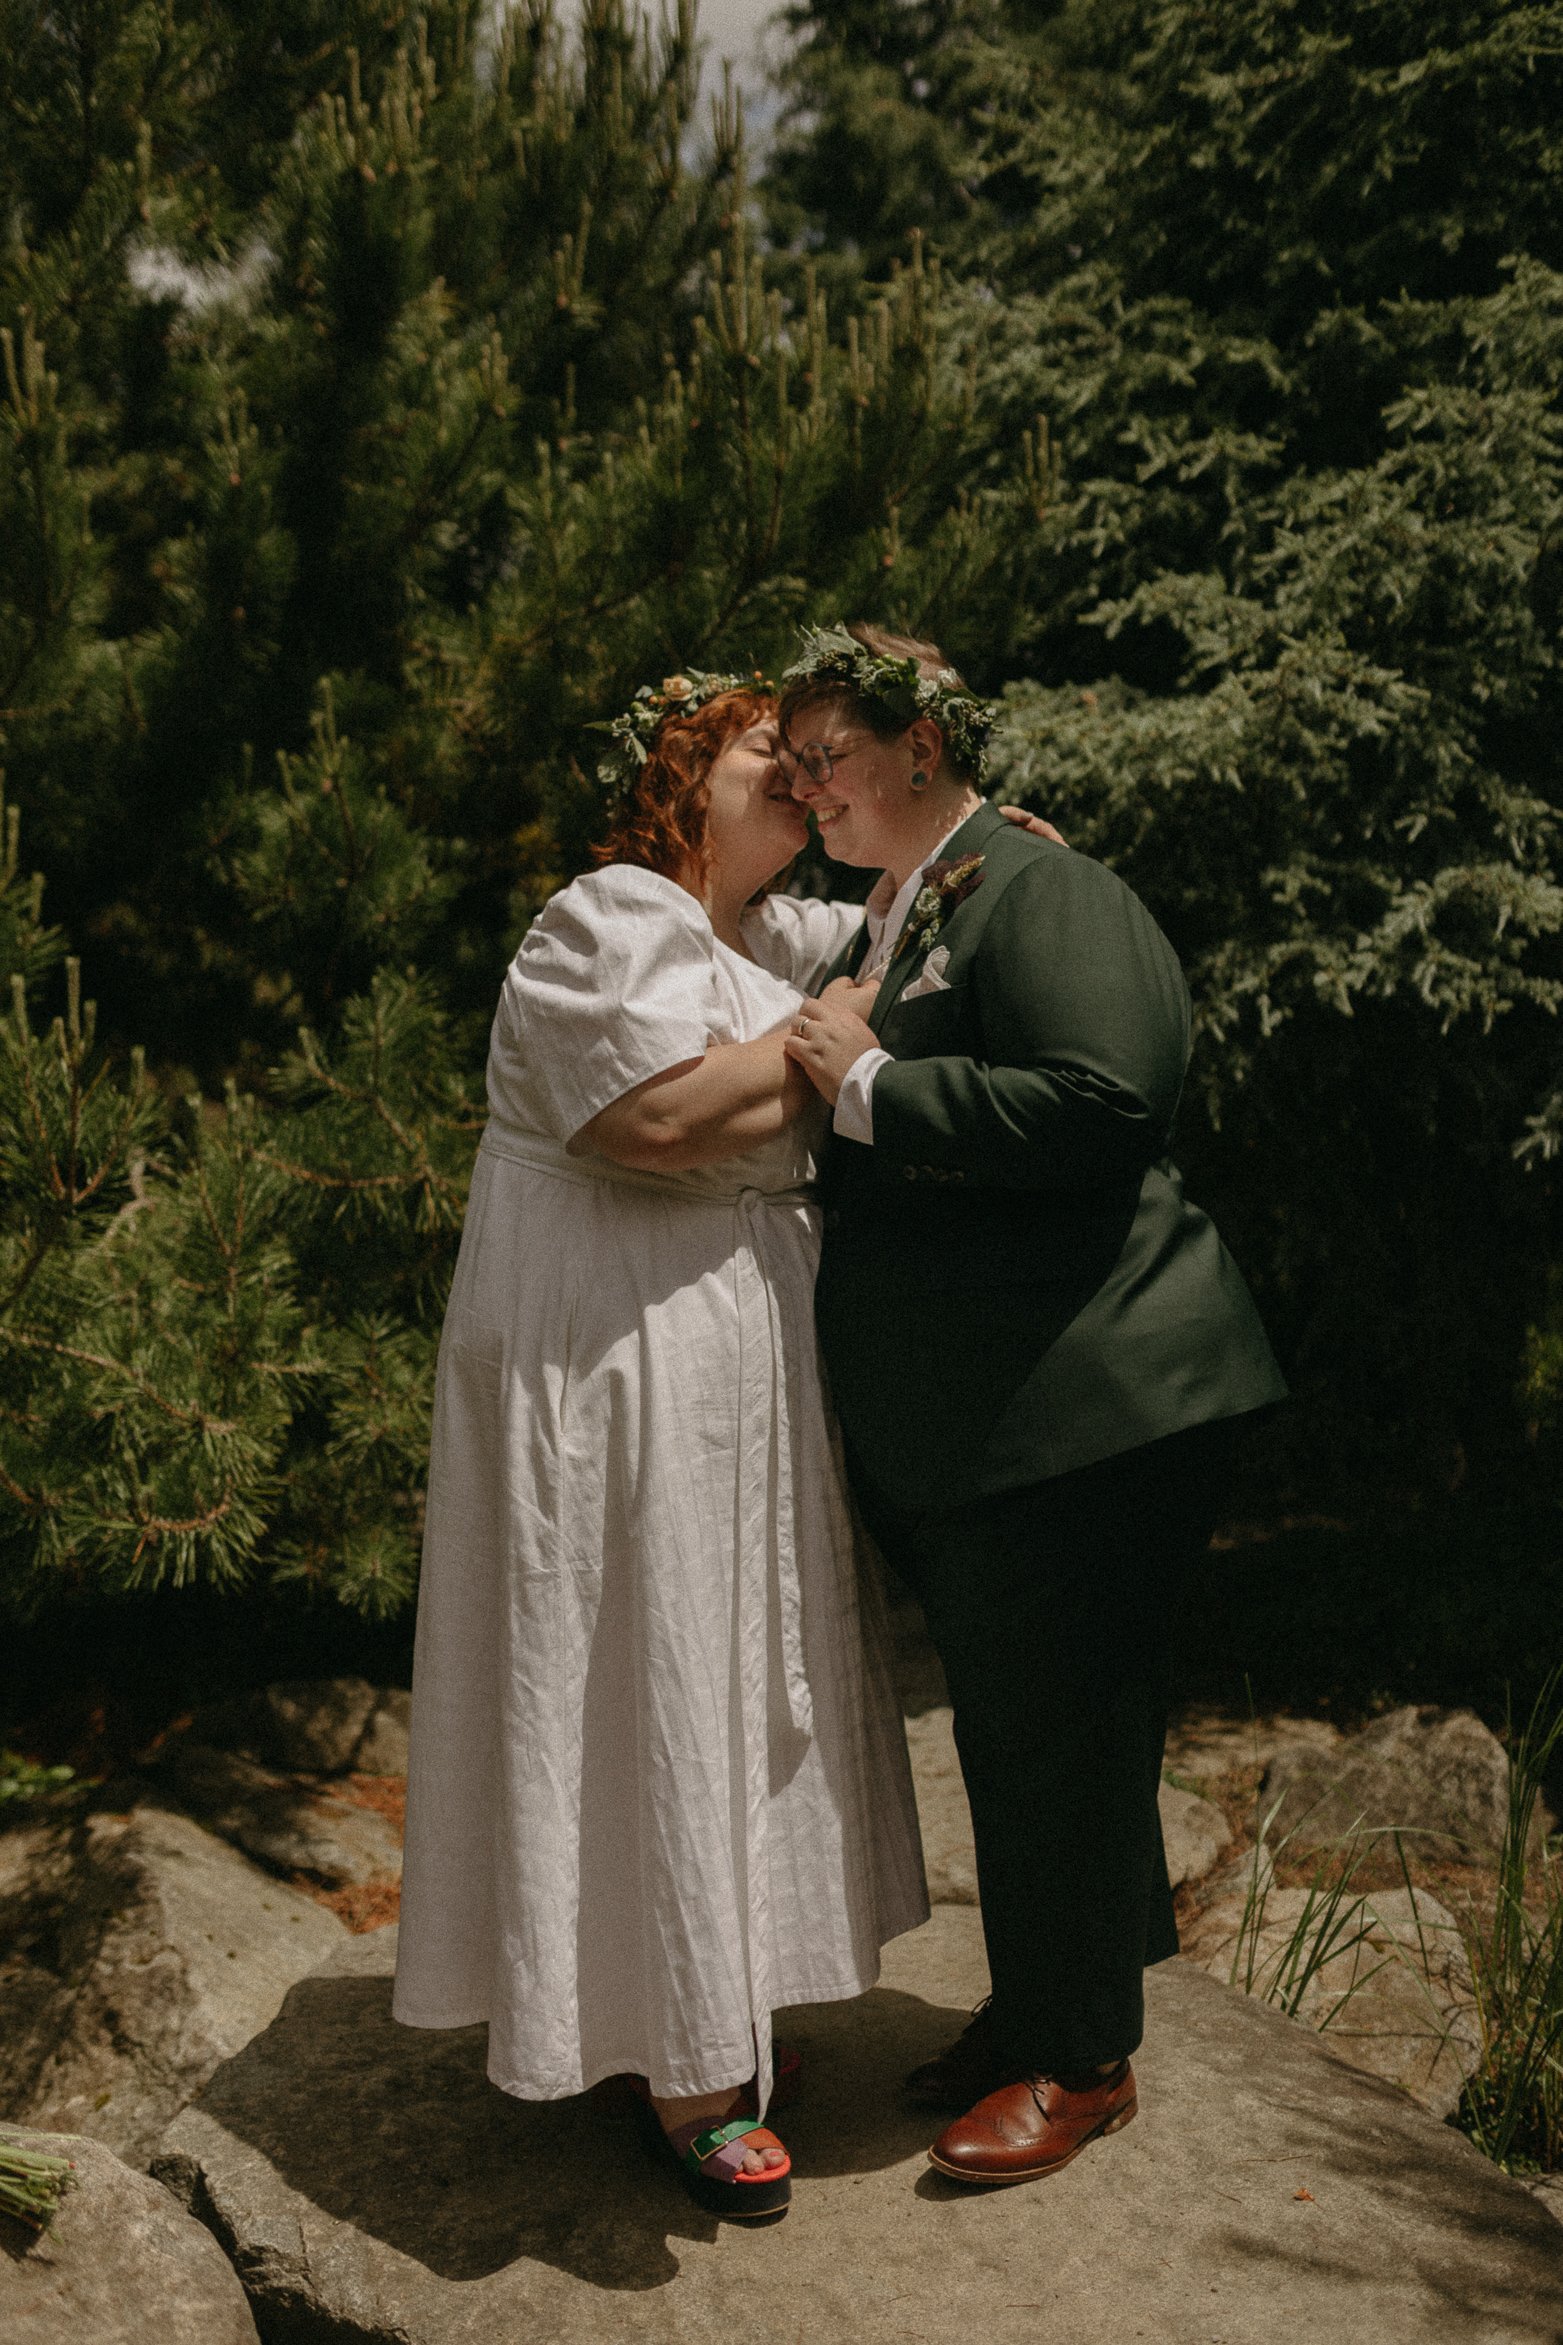 sunsoaked-queer-seattle-washington-arboretum-rose-garden-lqbtq-wedding-by-genderqueer-tacoma-elopement-photographer-halle-roland-photography-27.jpg